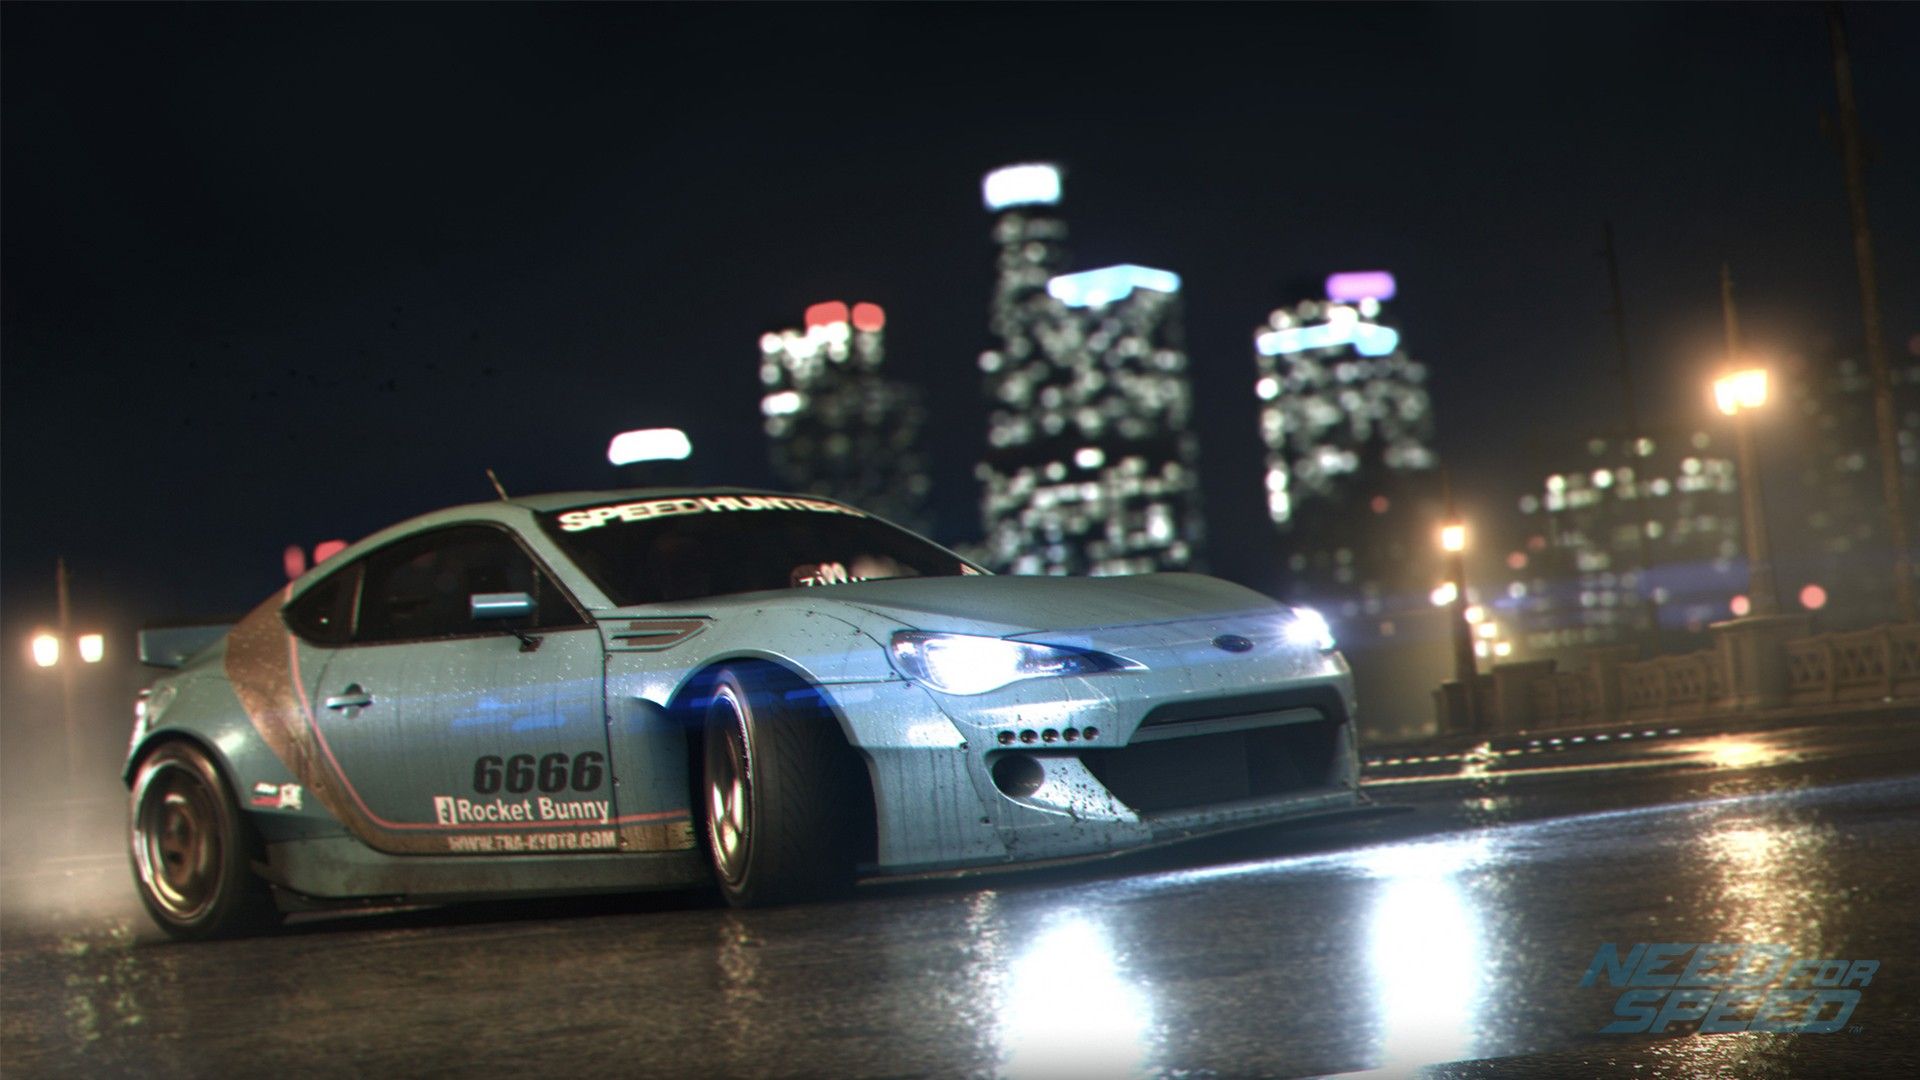 Need For Speed, Video Games, Car, Rocket Bunny Wallpaper HD / Desktop and Mobile Background